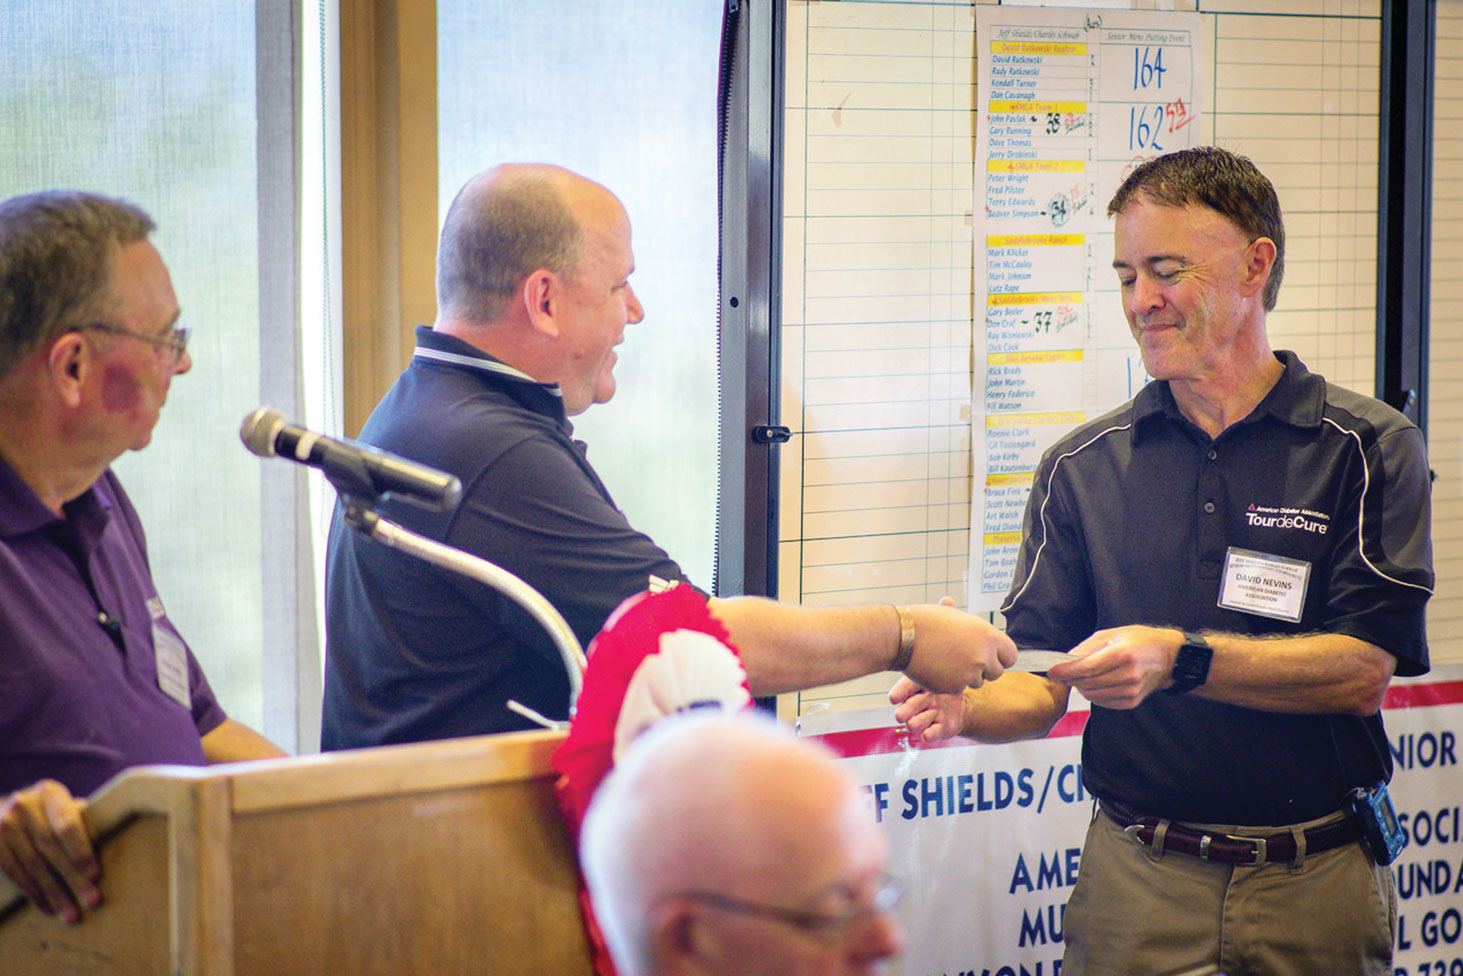 Harlan Hobbs looks on as Jeff Shields presents a check for $1000 to Dave Nevins of the Tucson office of the American Diabetes Association; Eric Peffer, photographer